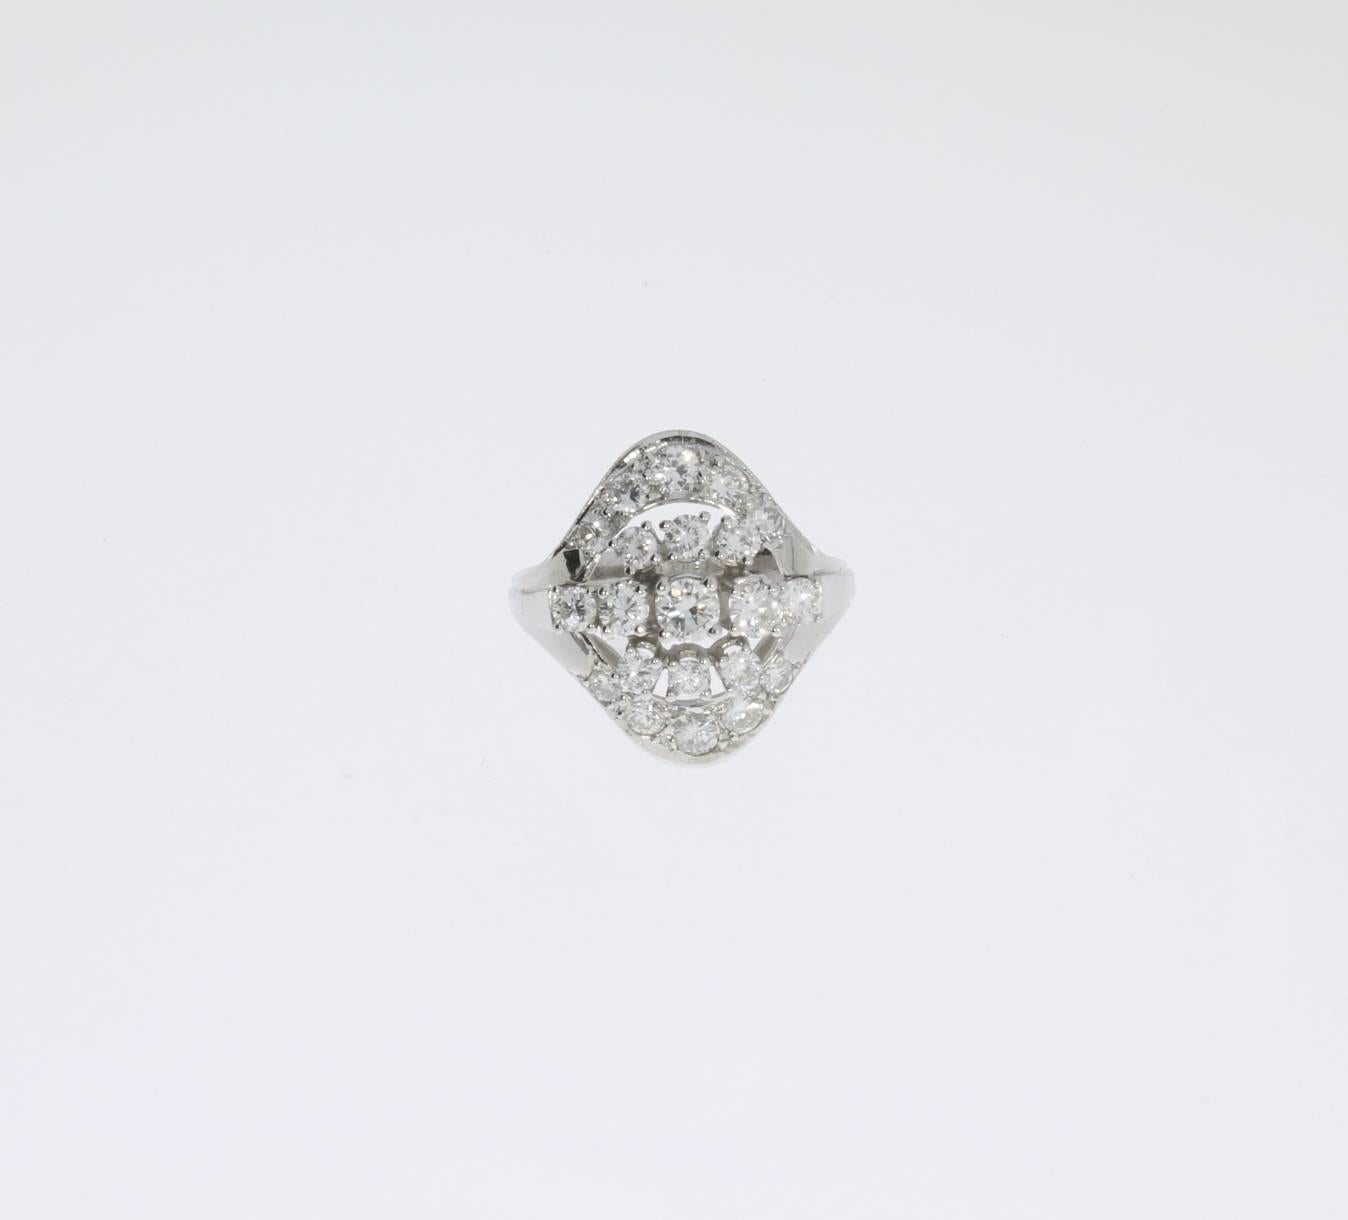 Europe, 1950's. Composed of 21 brilliant-cut diamonds weighing approximately 1,42 ct. Mounted in 14 K white gold. Hallmarked inside with a fineness 585. Weight: 5,4 g. Dimensions: circa 0.79 x 0.67 ( 2 x 1,7 cm ). 
Ring size: 57 ( US 7 3/4 ).